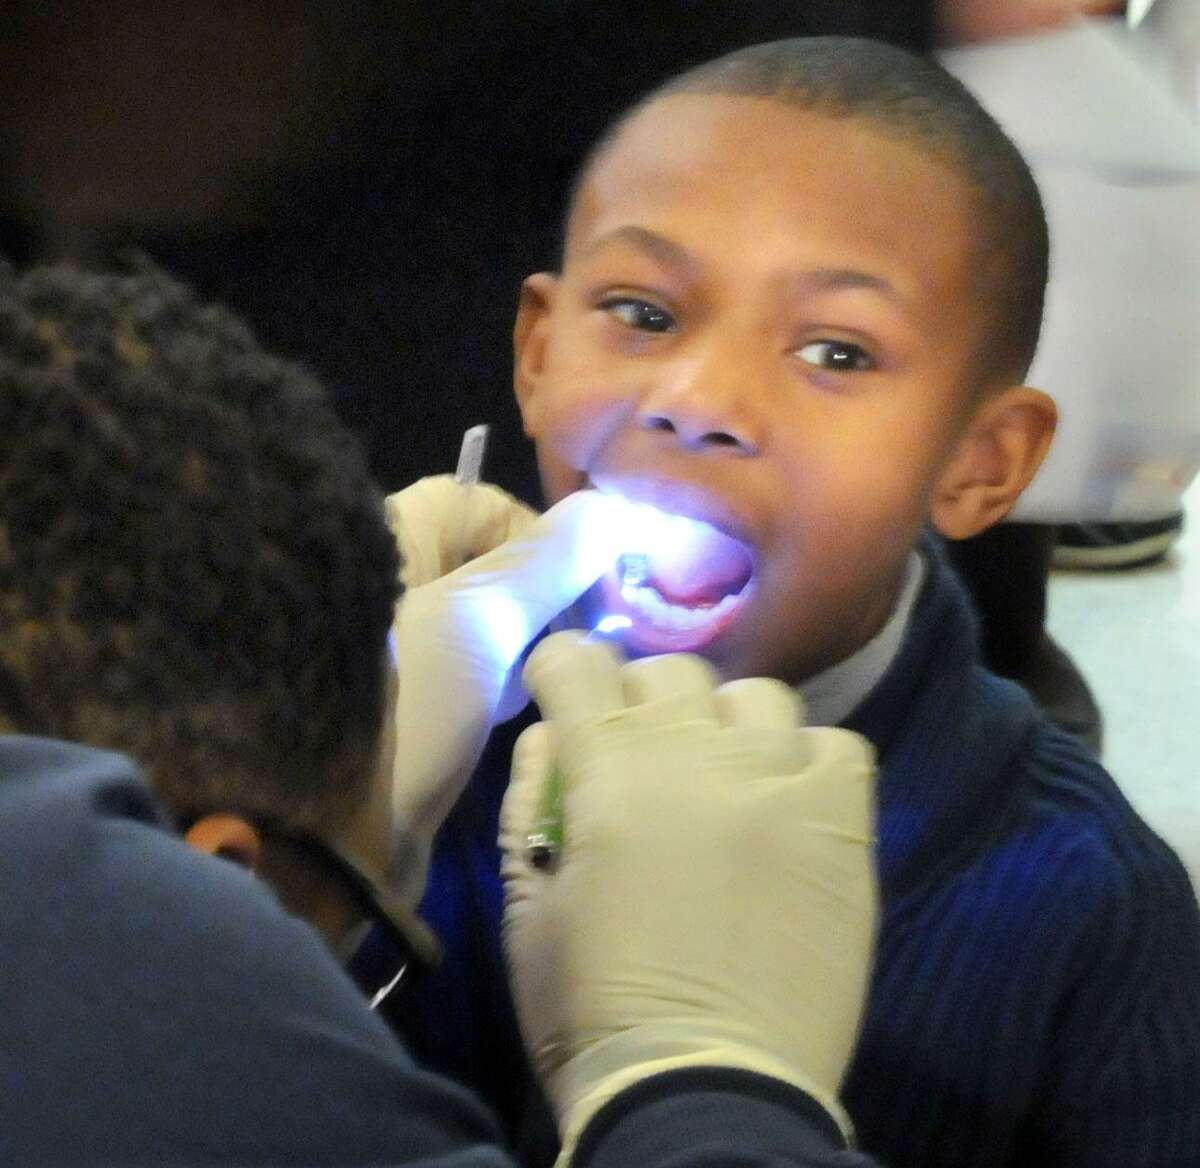 Xerox underwrote a visit by area dental professionals to Savin Rock Community School in West Haven to give a free dental exam to pre-K through 2nd grade students. Lajajuan Dancy Jr. age 8 getting his exam from pediatric dentist Dr. Darnell Young of Elm Family Dental, West Haven. Photo by Mara Lavitt/New Haven Register2/28/12